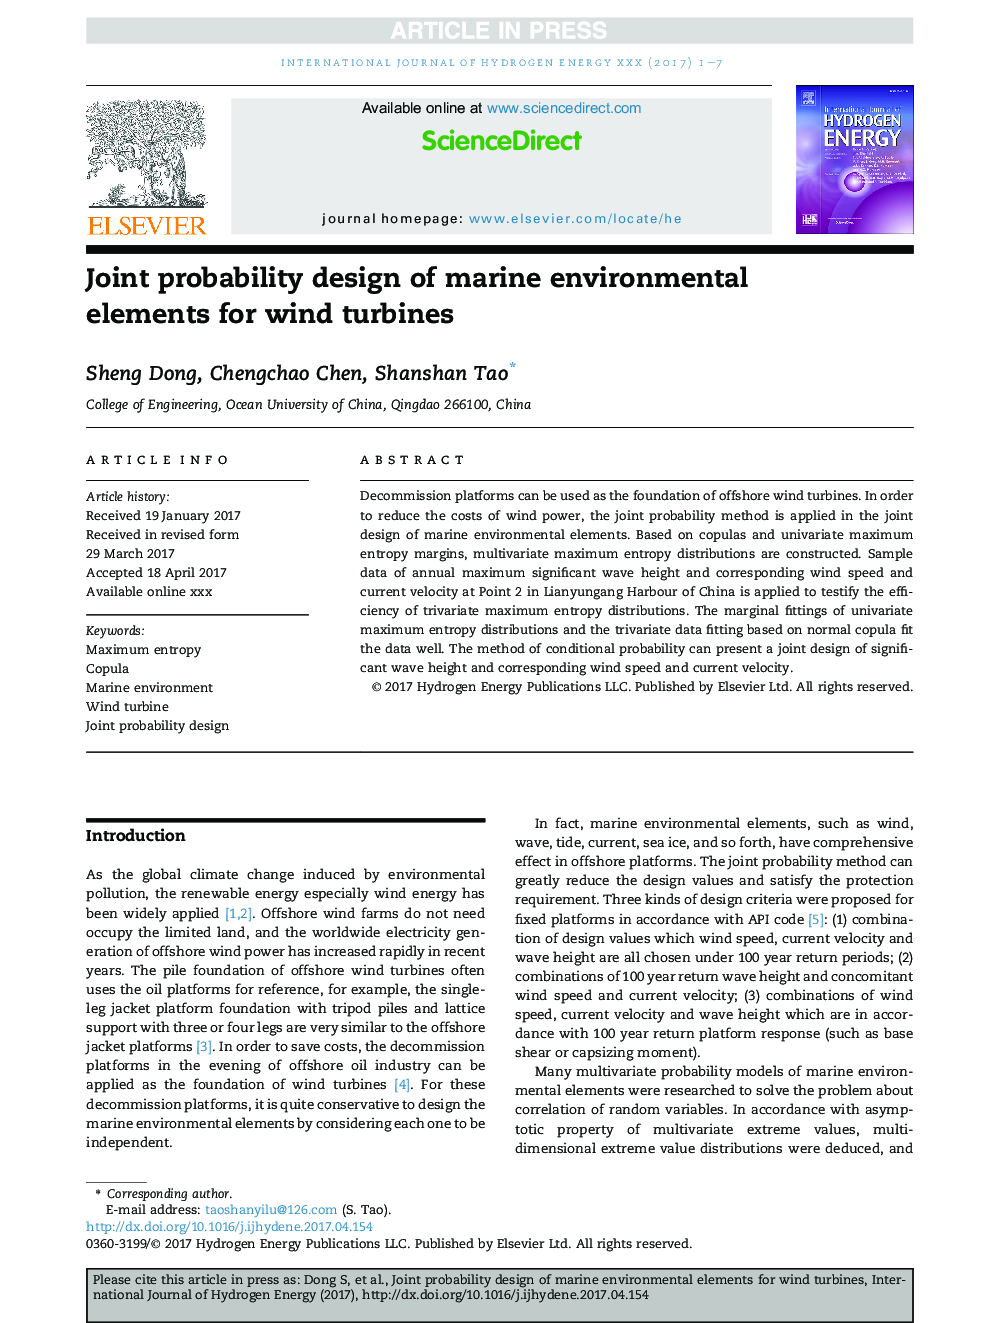 Joint probability design of marine environmental elements for wind turbines